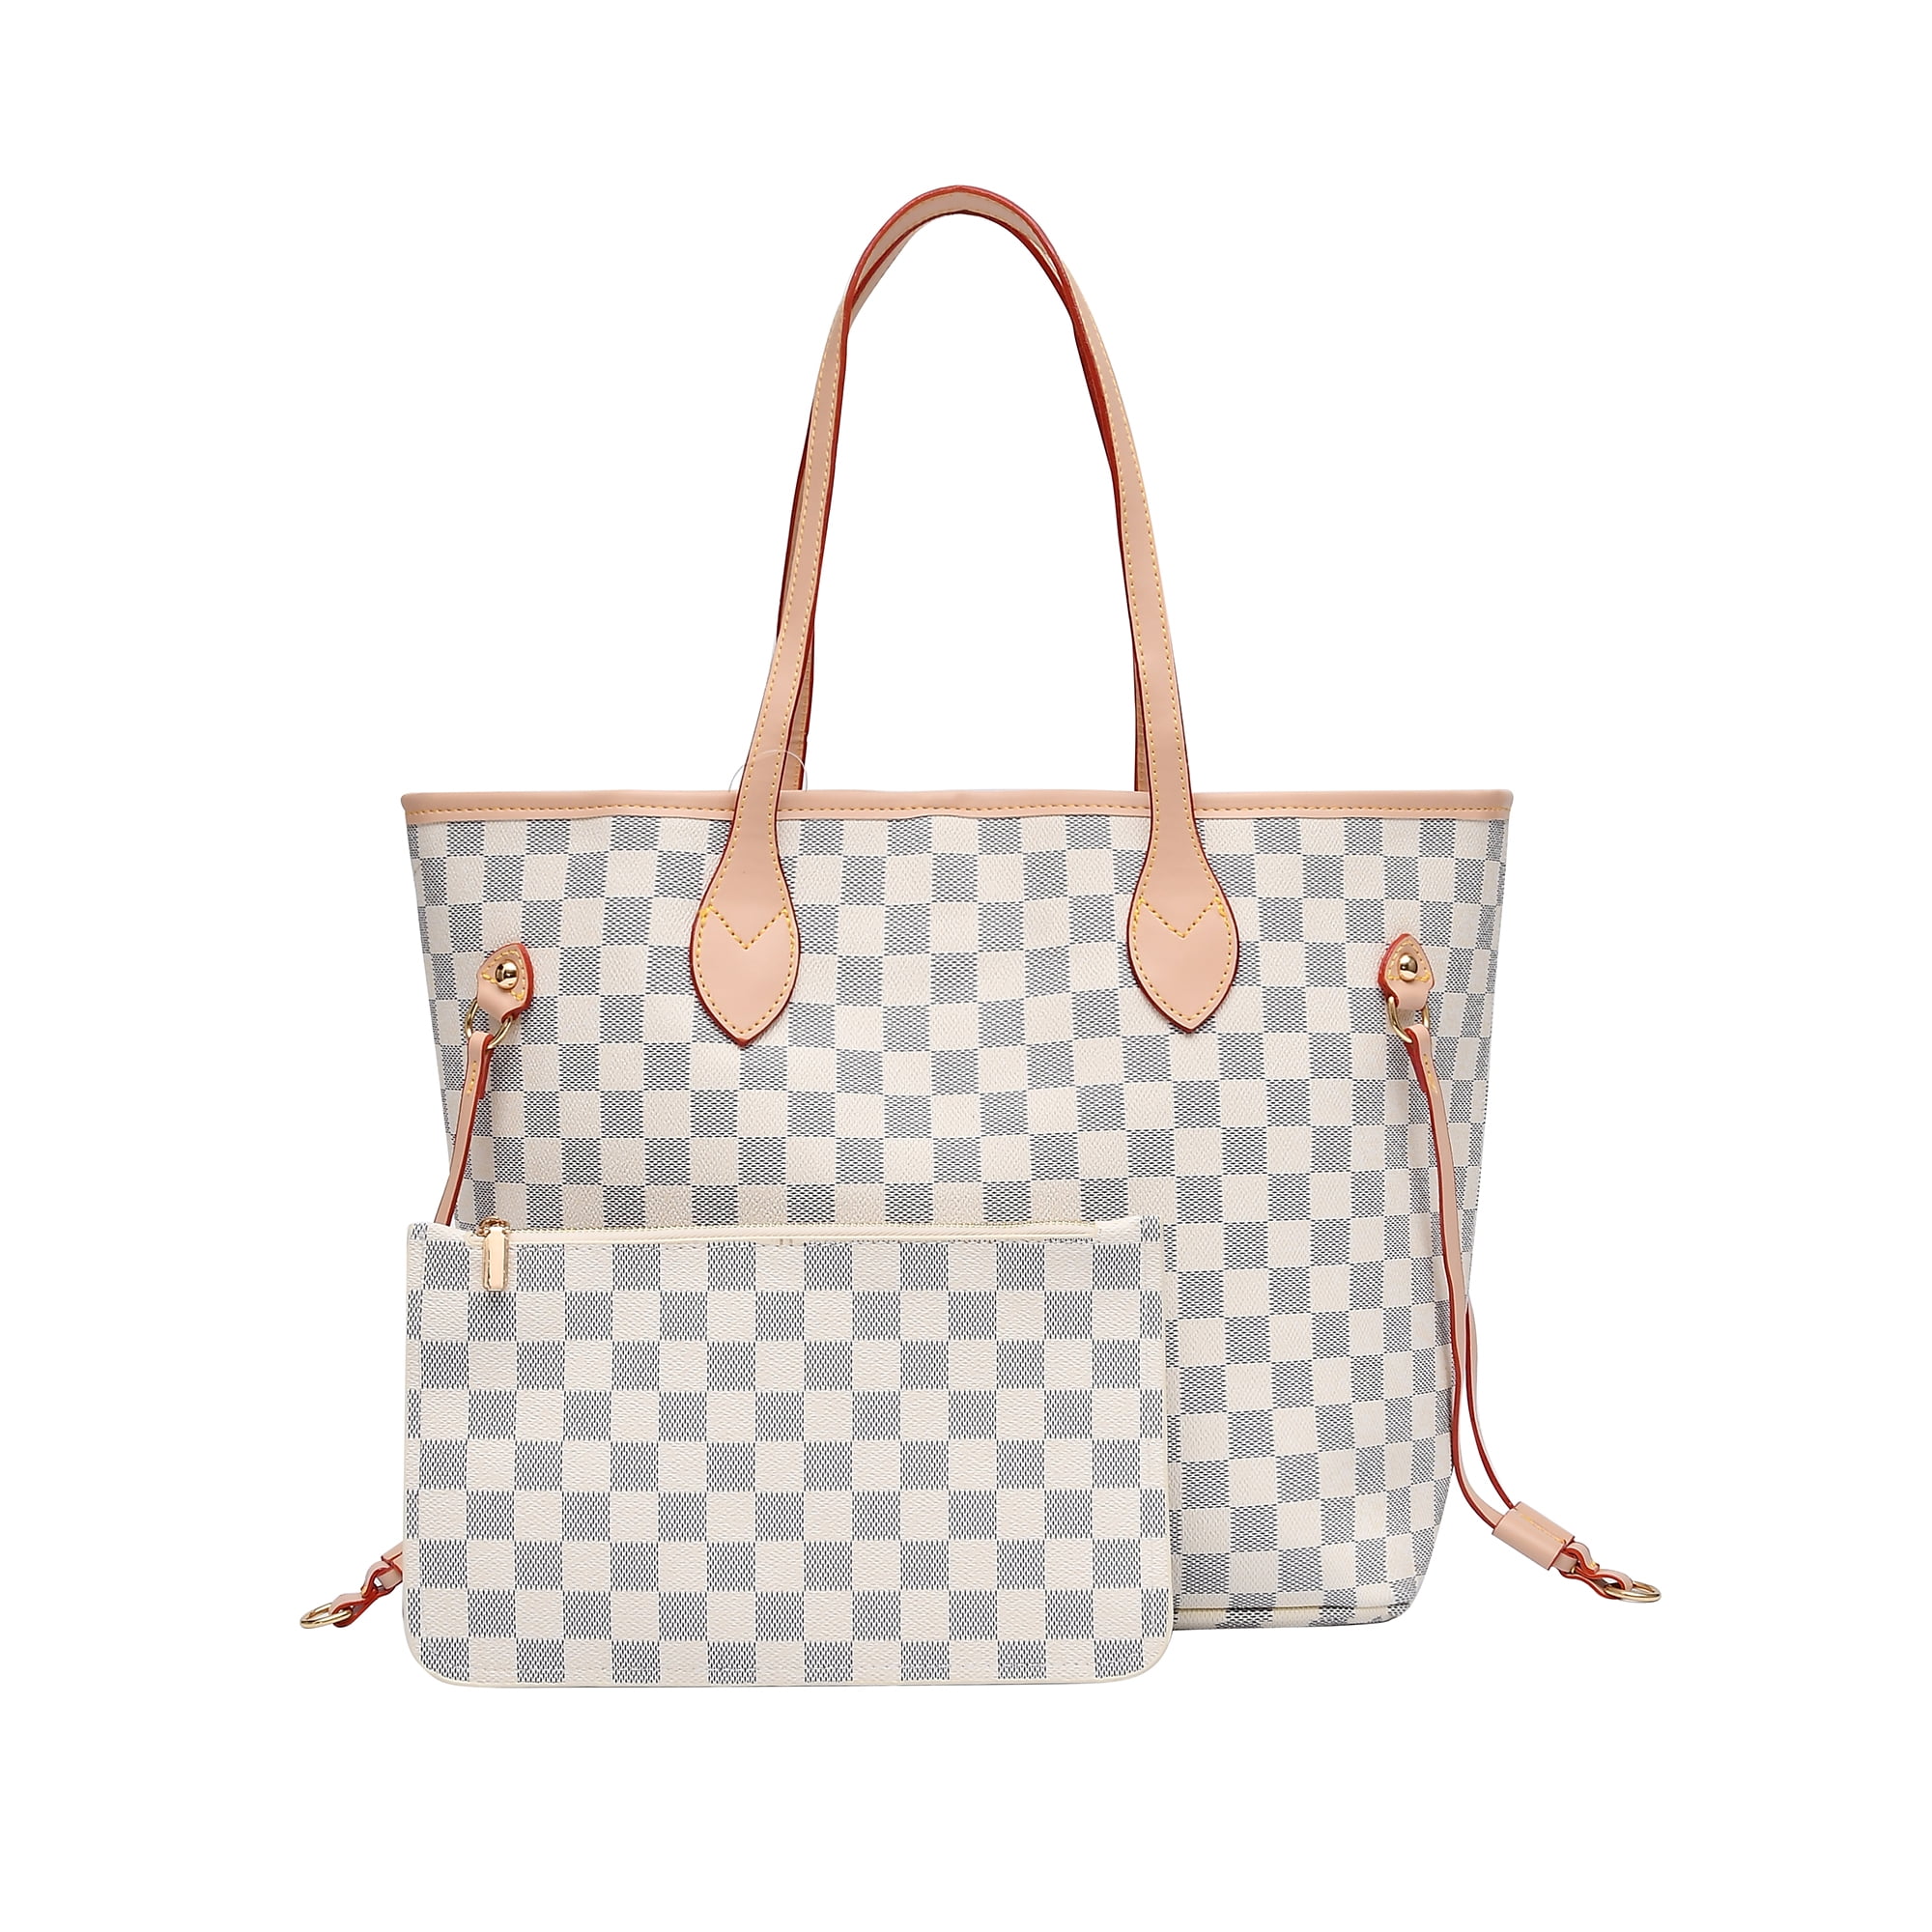 MK Gdledy Women Handbags Checkered Tote Shoulder Bag with inner pouch Womens  Crossbody bag- PU Vegan Leather -Cream 